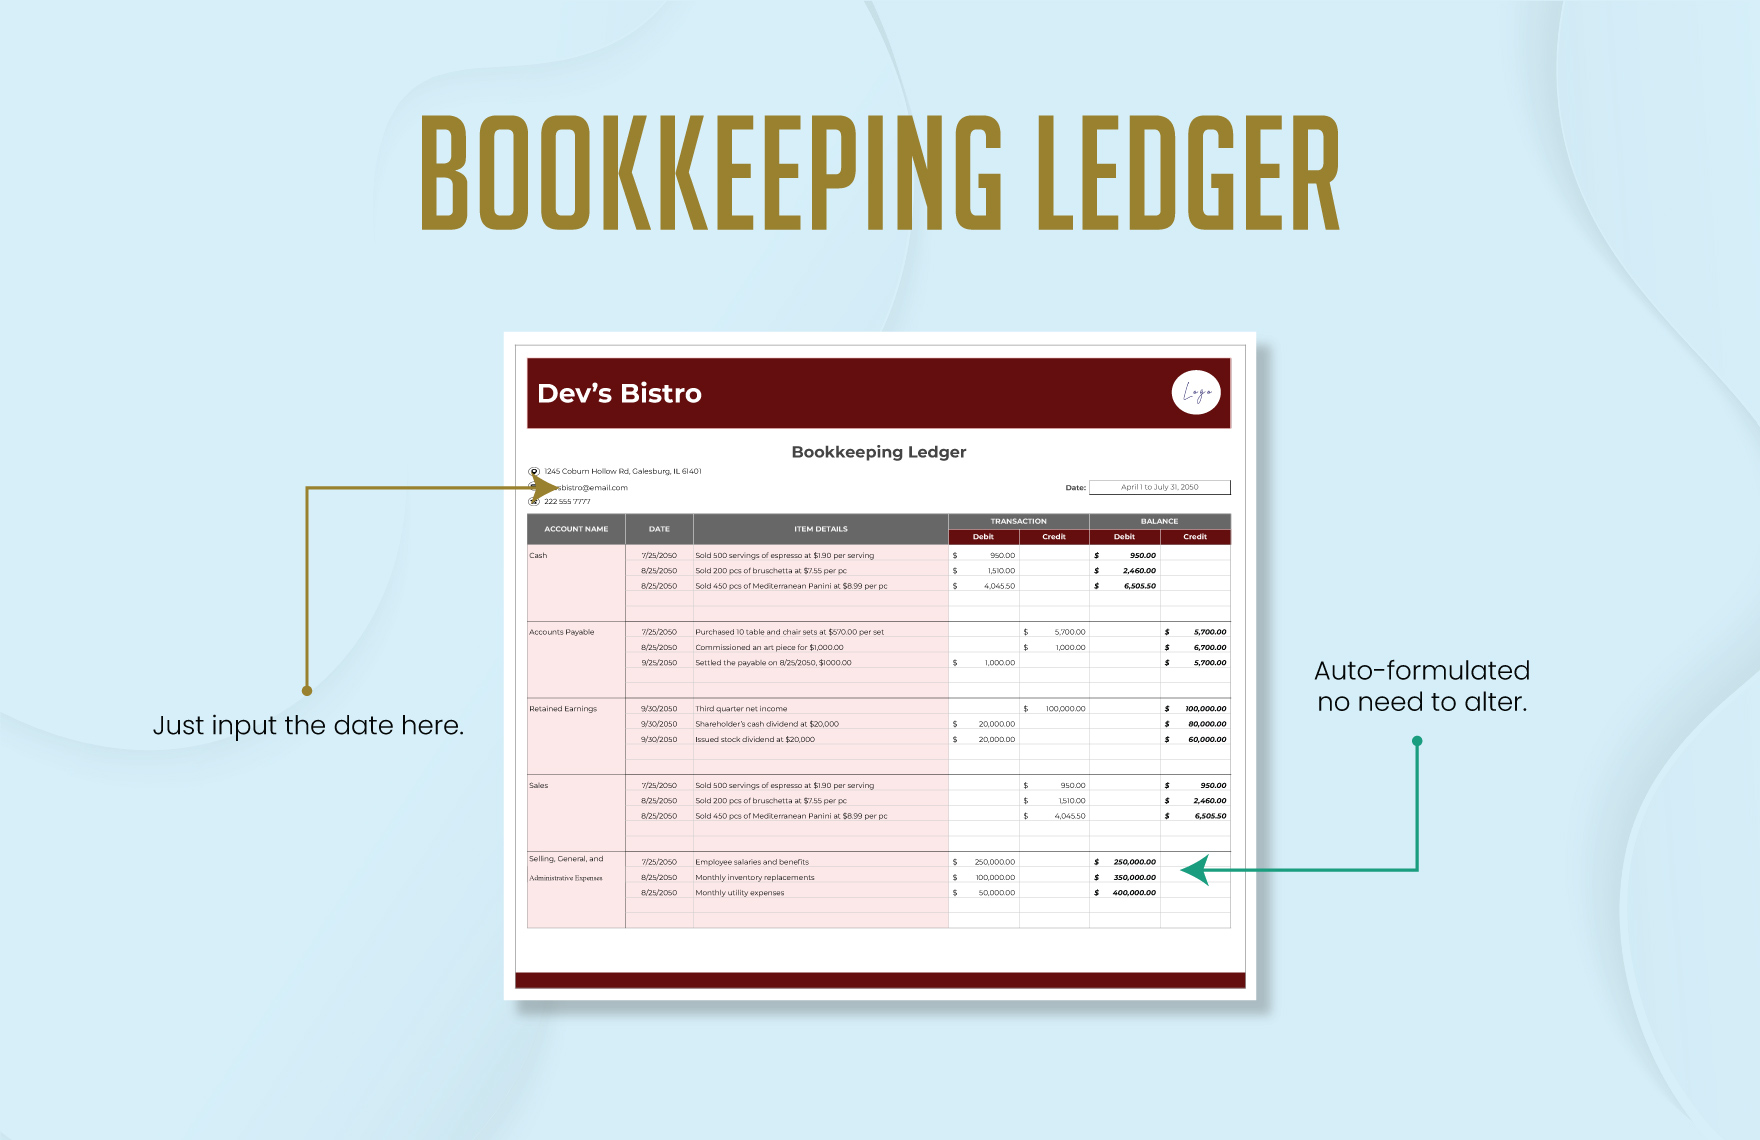 Bookkeeping Ledger Template